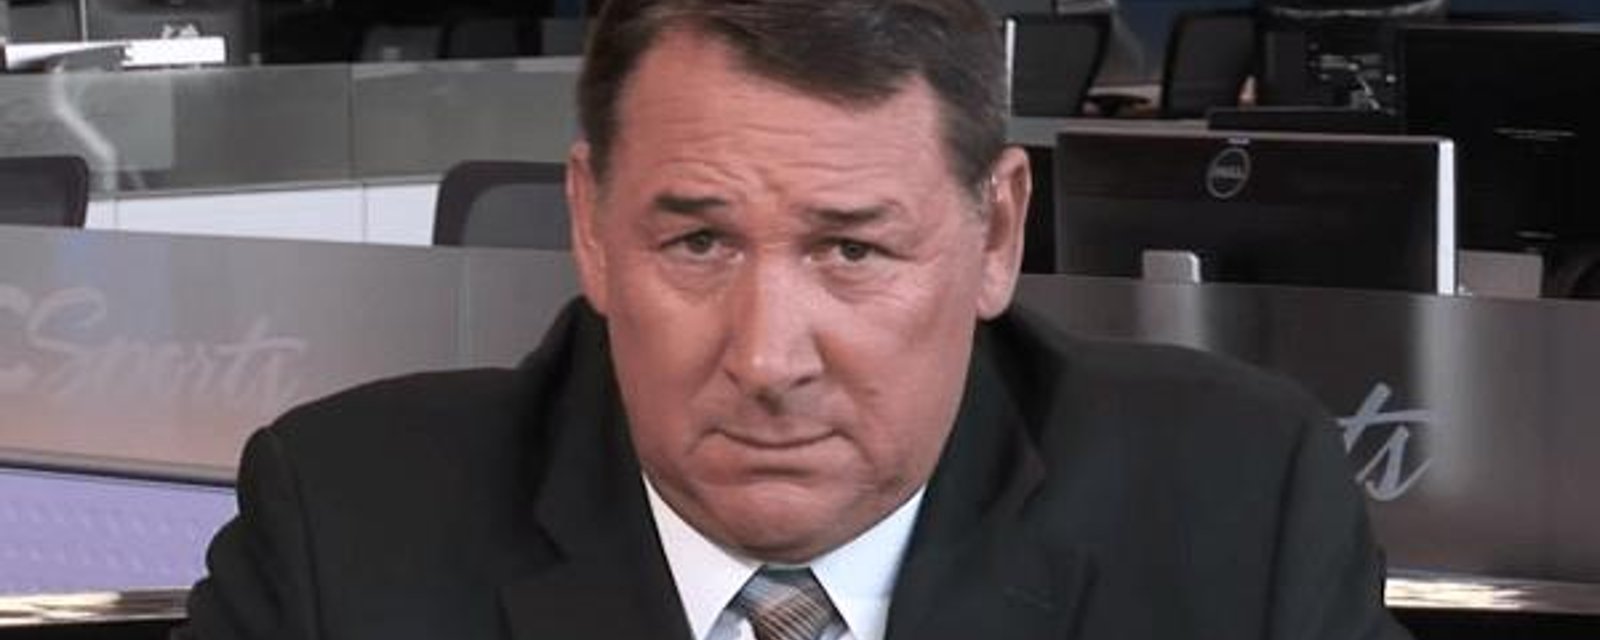 Mike Milbury portrayed as biggest jerk and terrible GM in Rick Dipietro’s interview